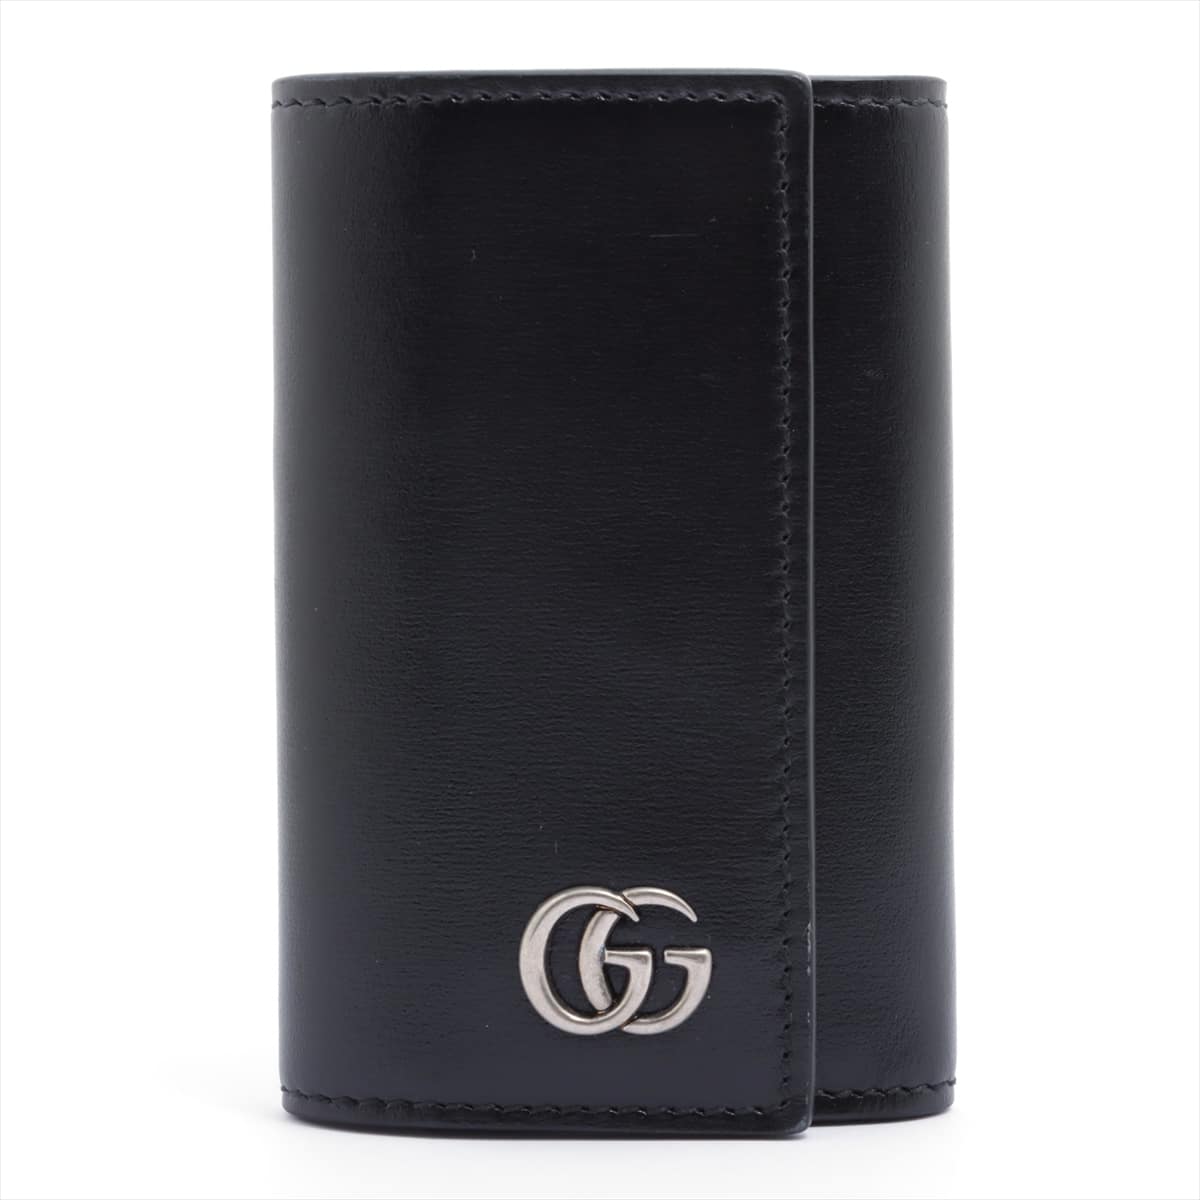 Gucci GG Marmont 435305 Leather Key Case Black